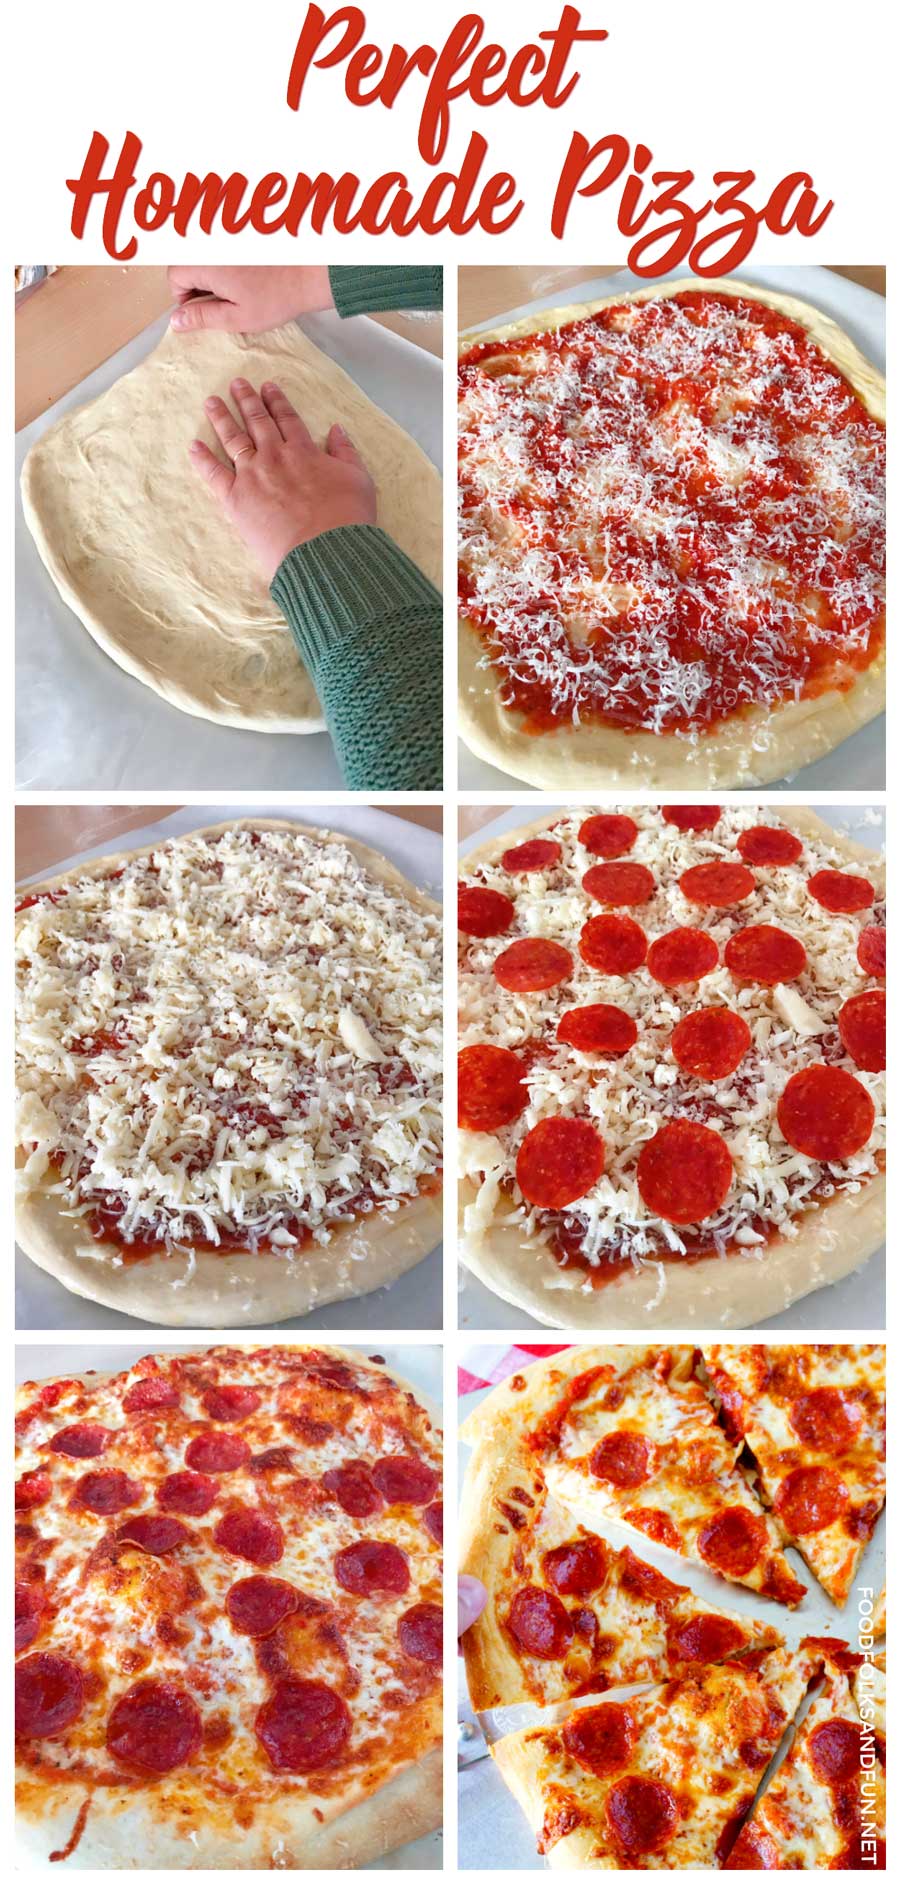 How to Make Homemade Pizza - it's seriously the best pepperoni pizza recipe!